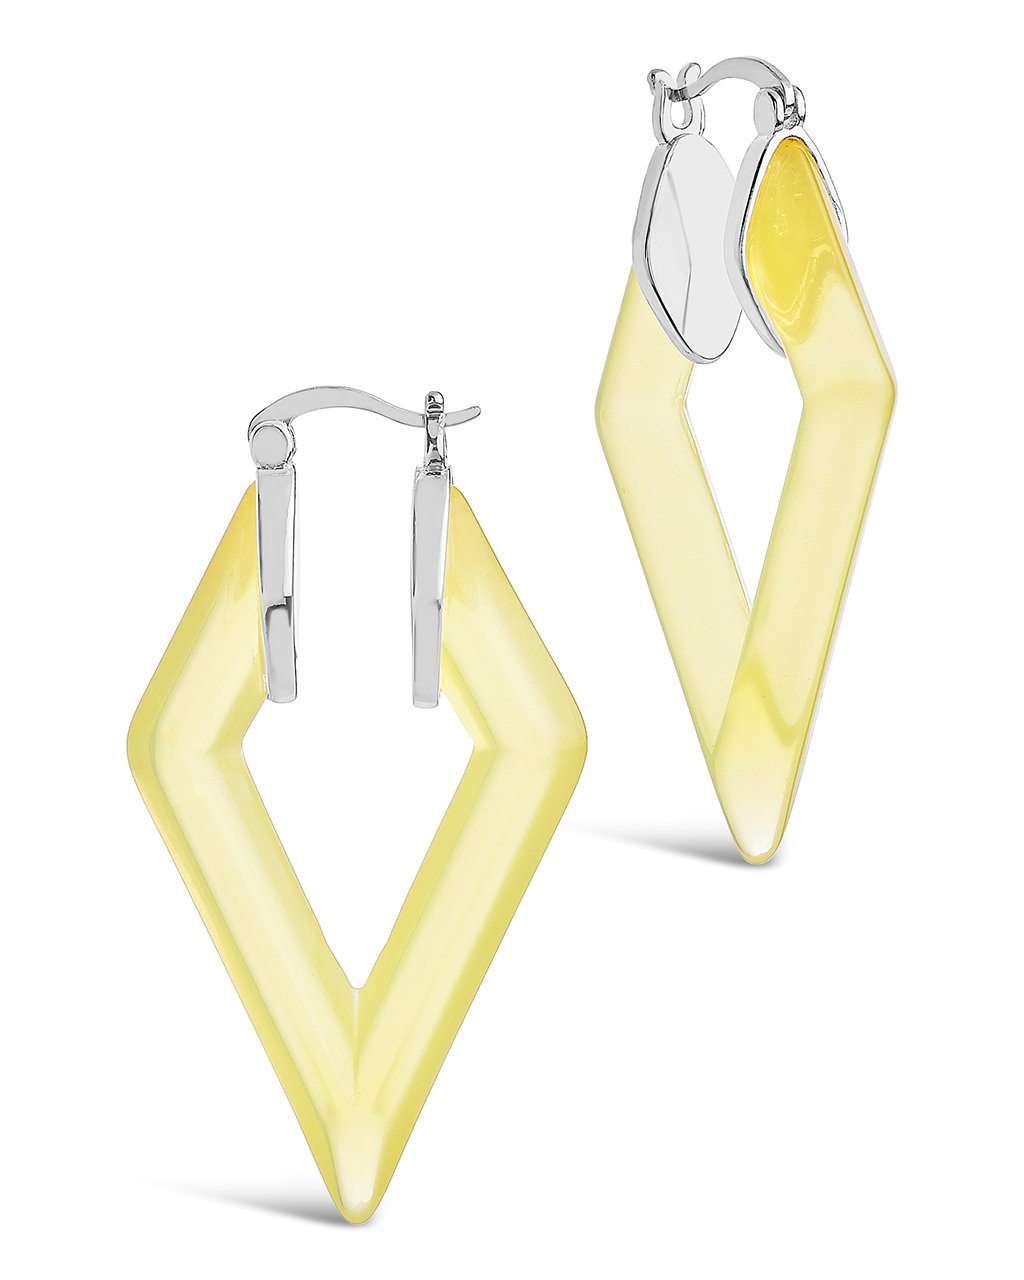 Lucite Diamond Hoops Earring Sterling Forever Silver Canary